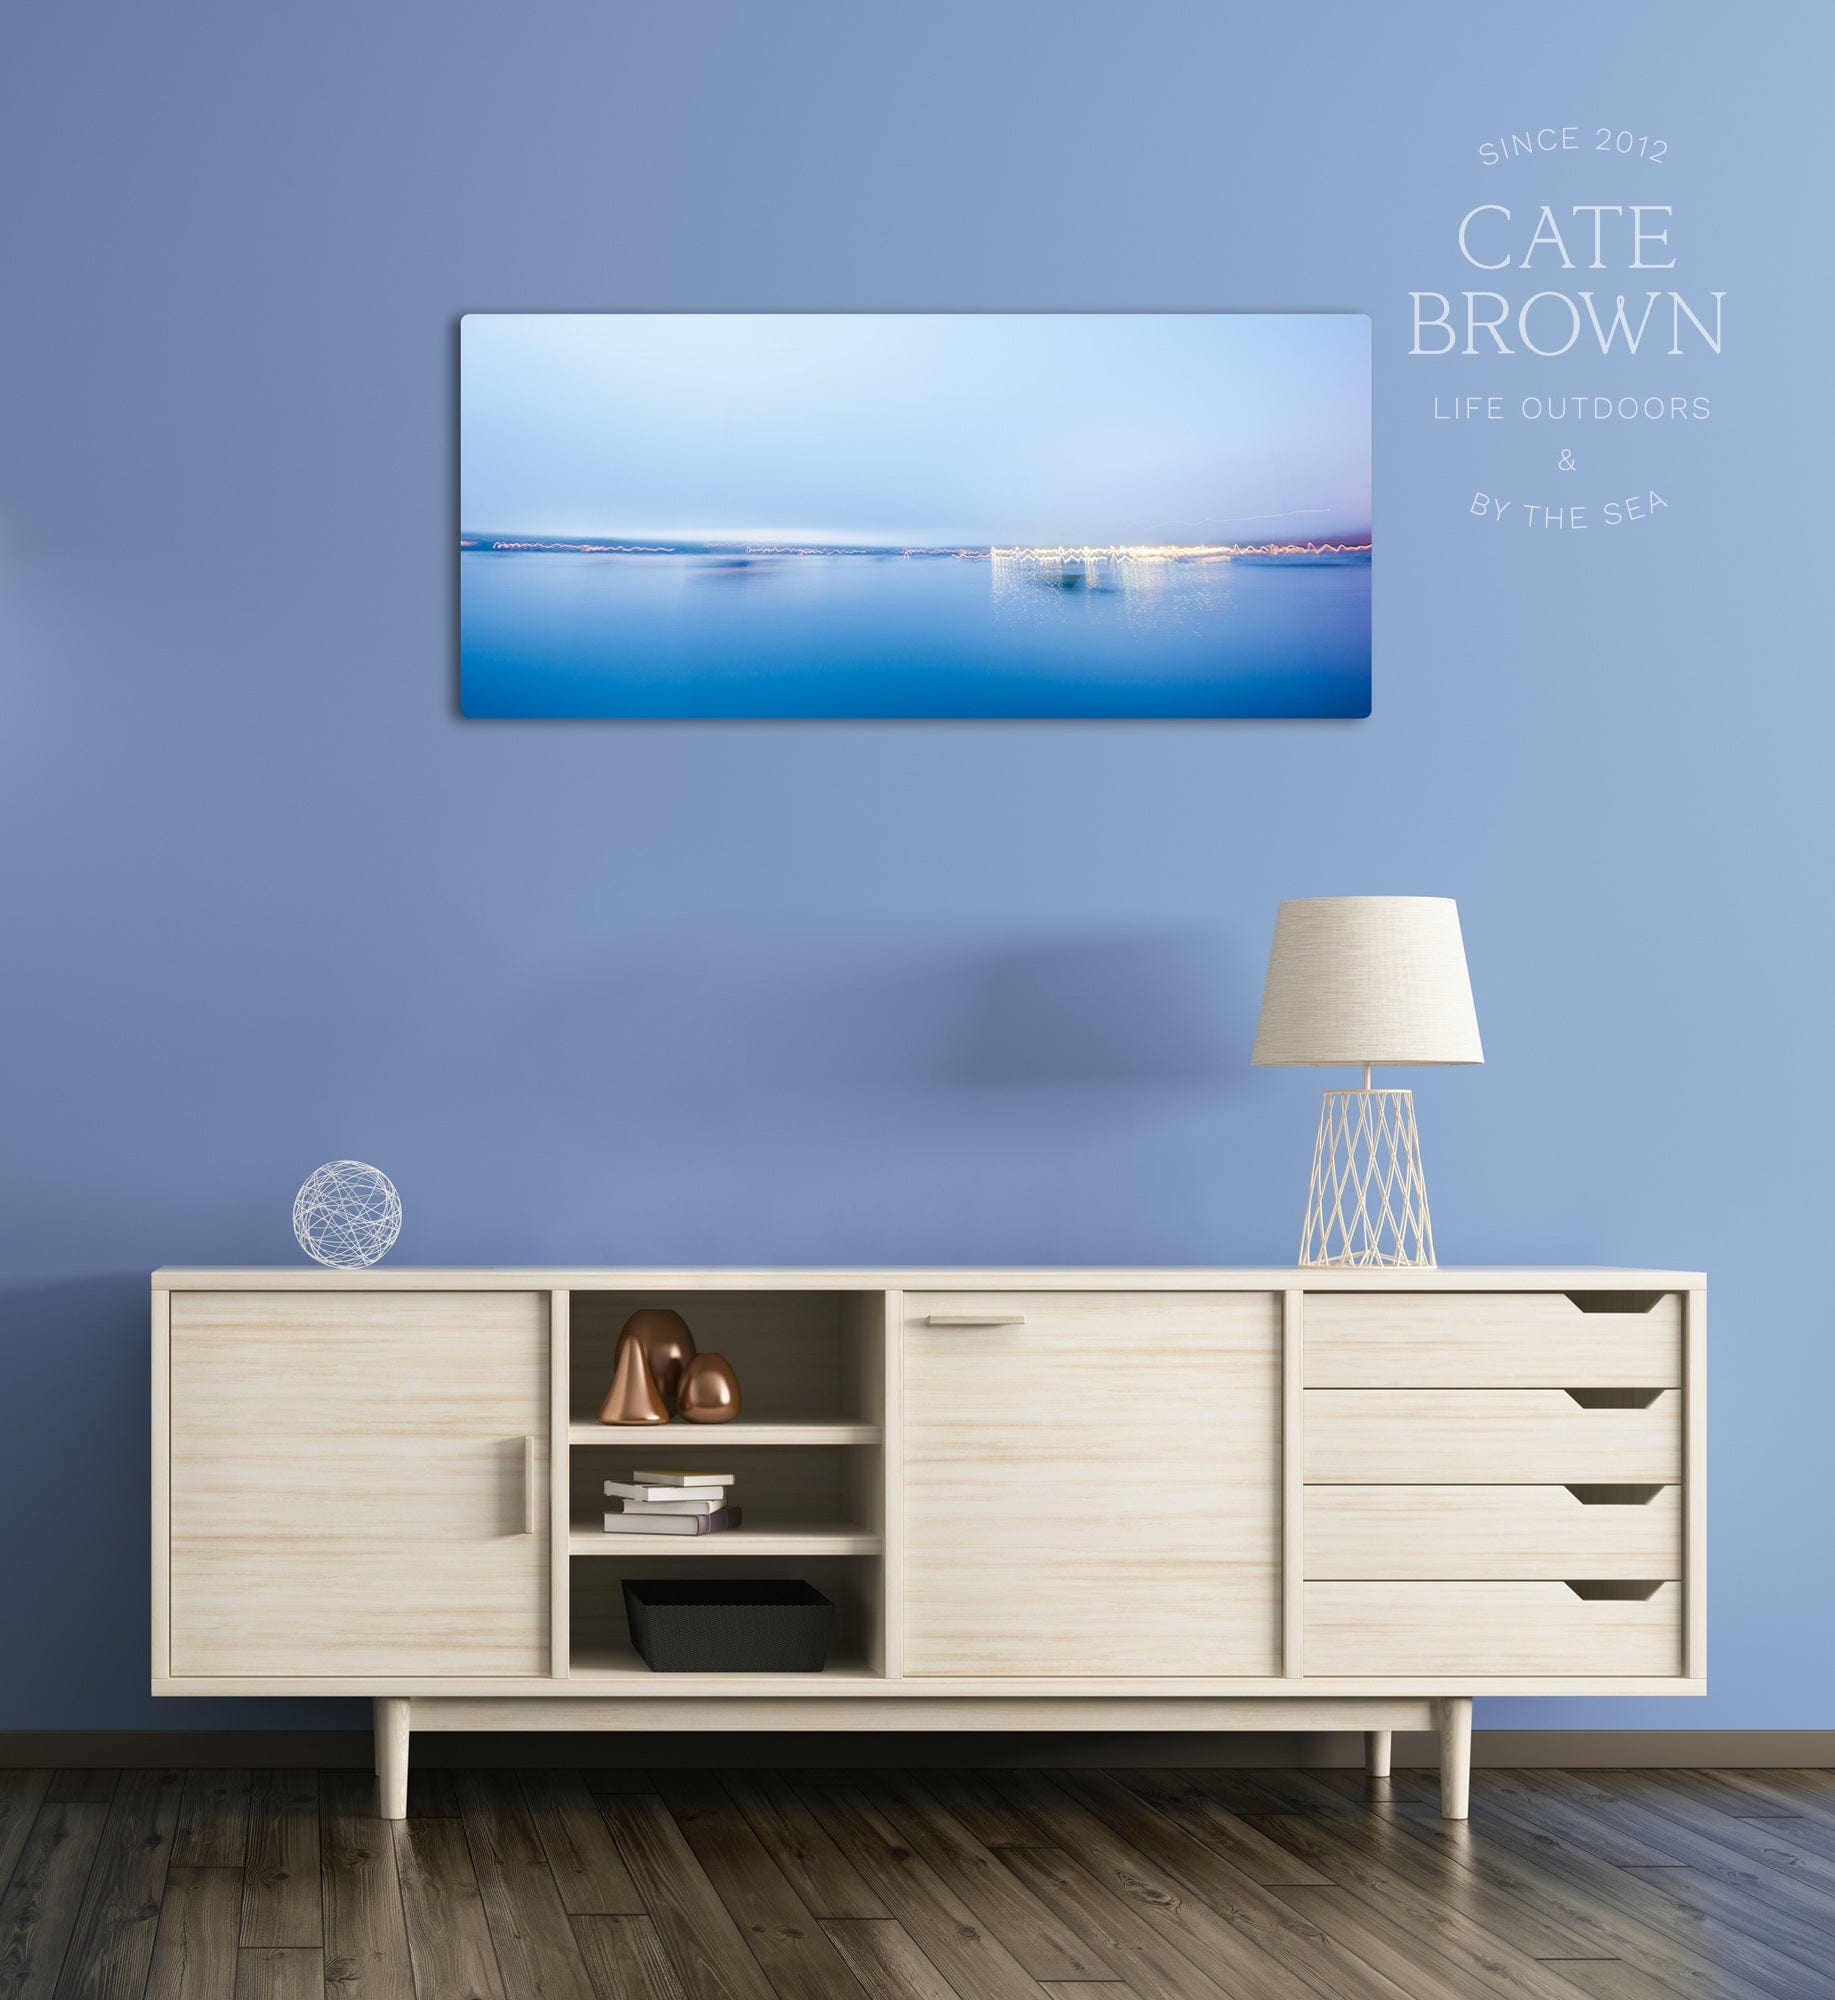 Cate Brown Photo Canvas / 12"x27" / None (Print Only) Stonington Harbor at Dusk  //  Seascape Photography Made to Order Ocean Fine Art